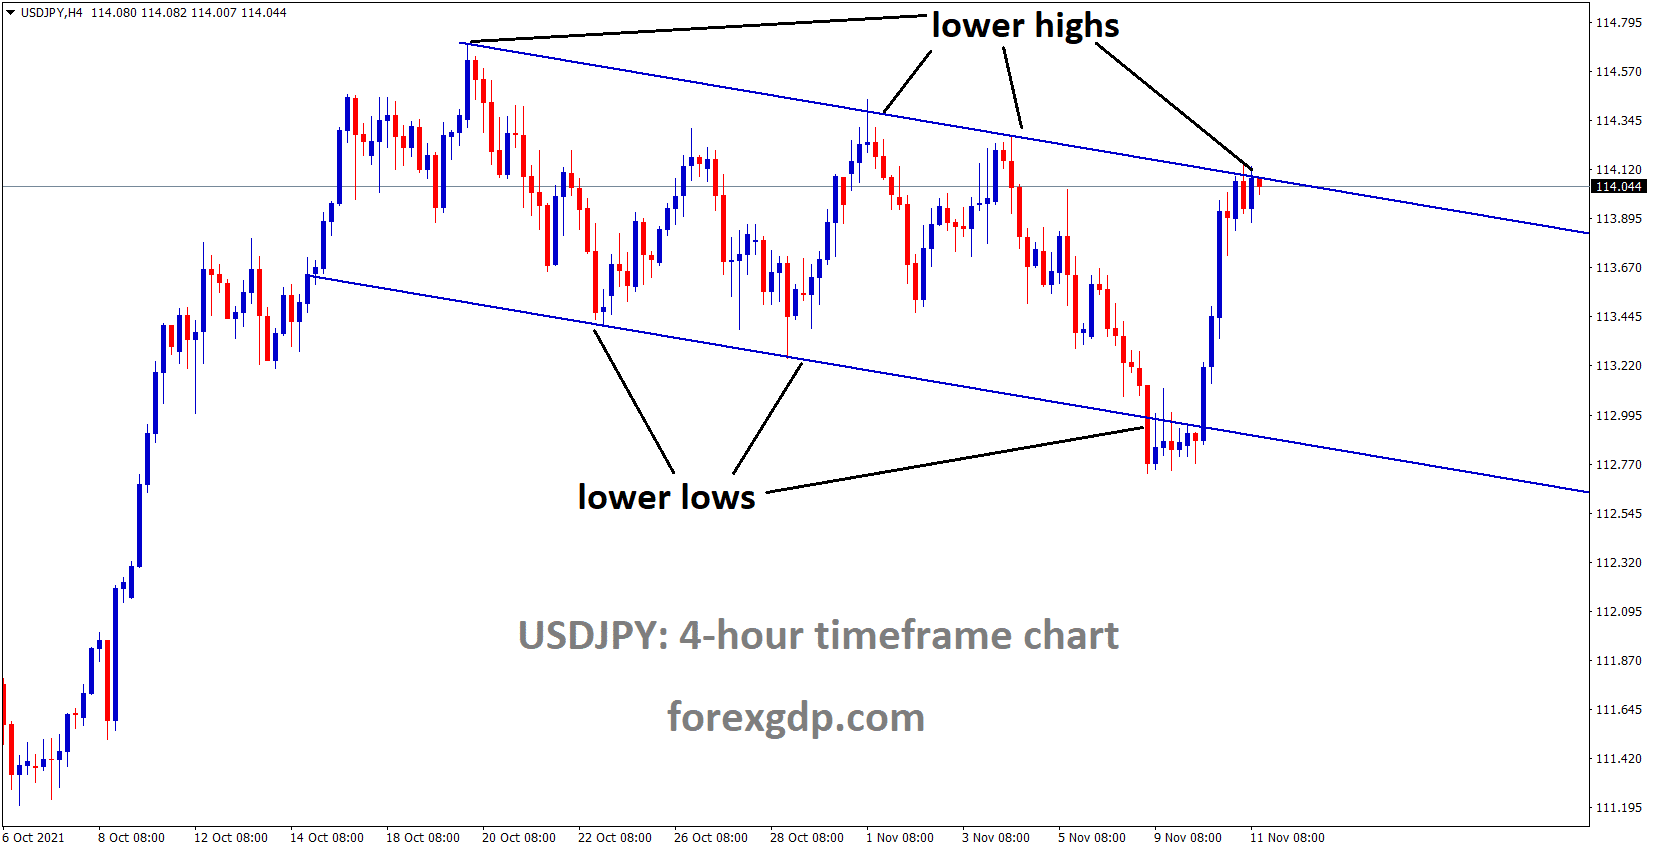 USDJPY has reached the lower higher area of the Descending channel